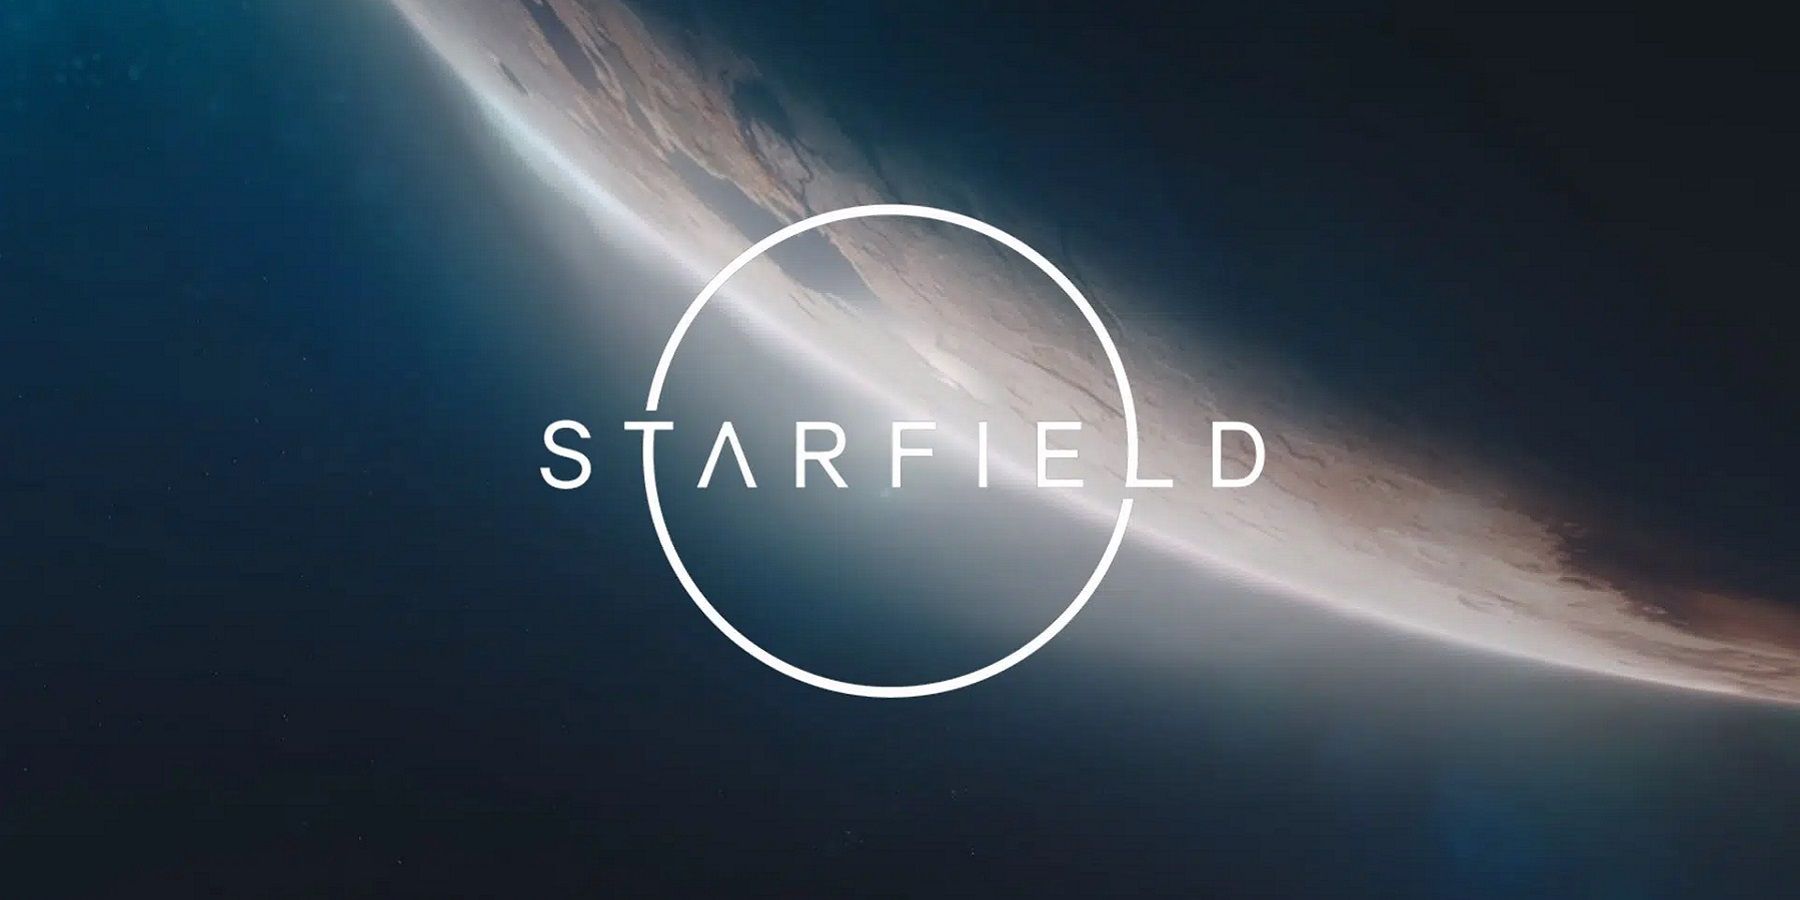 The Starfield logo with a dark, looming planet in the background.